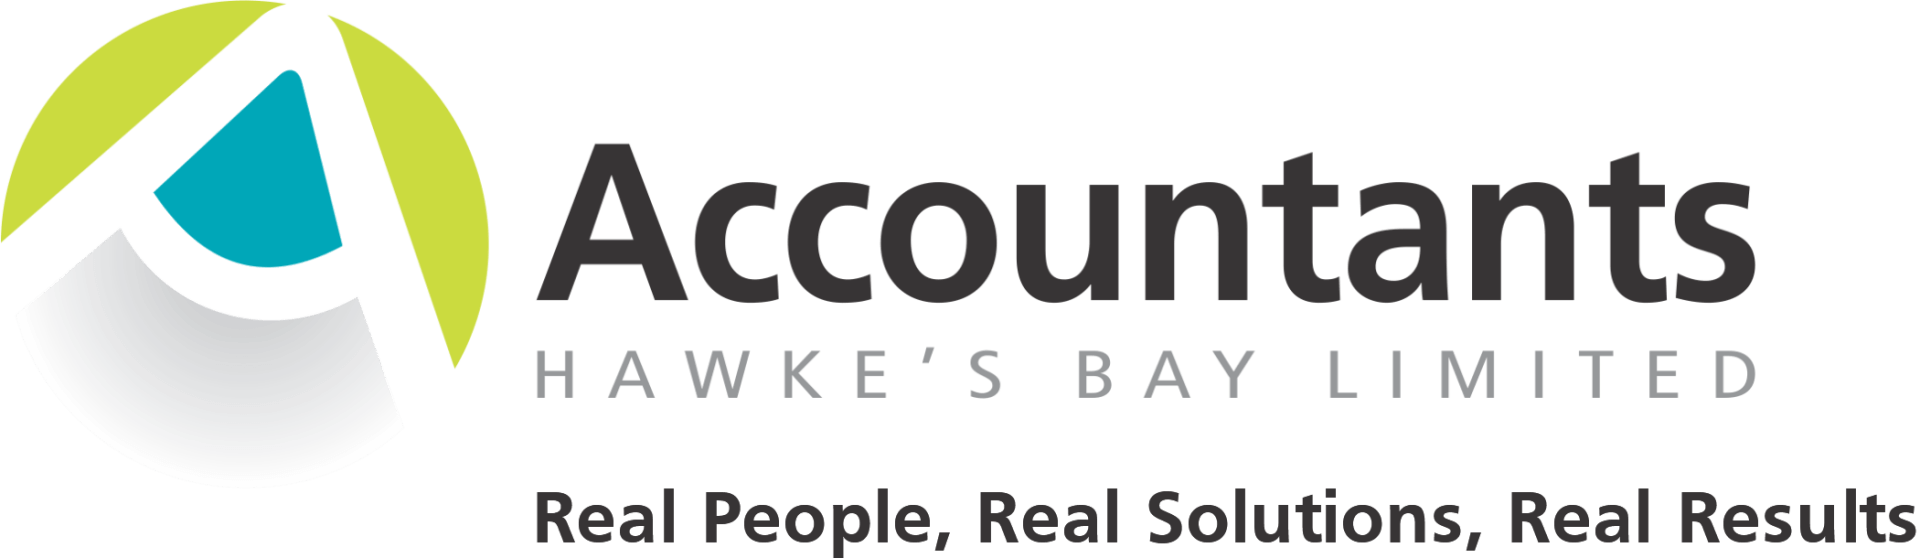 Accounting, Taxation, Business Growth and Software Solutions | Accountants Hawkes Bay | Onekawa, Napier